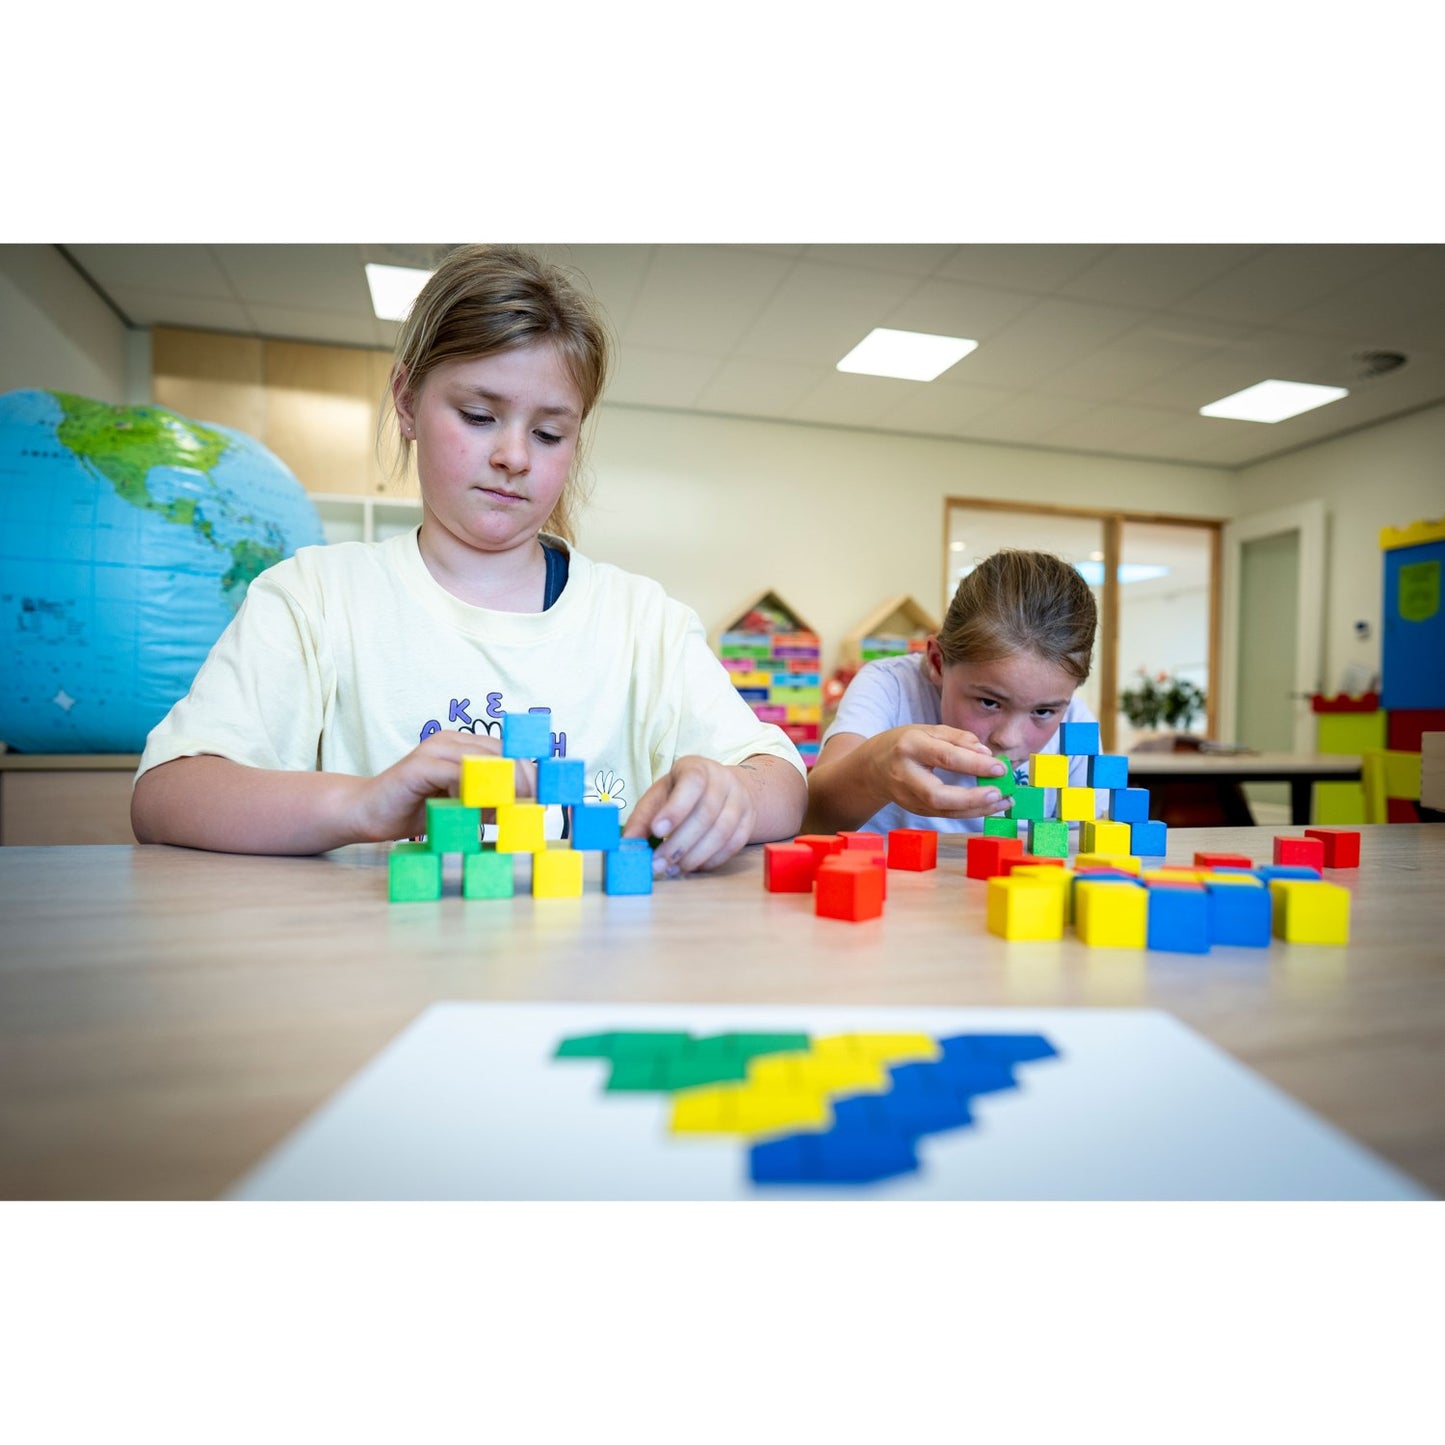 Educo Verti-Blocs - Build From 2D To 3D